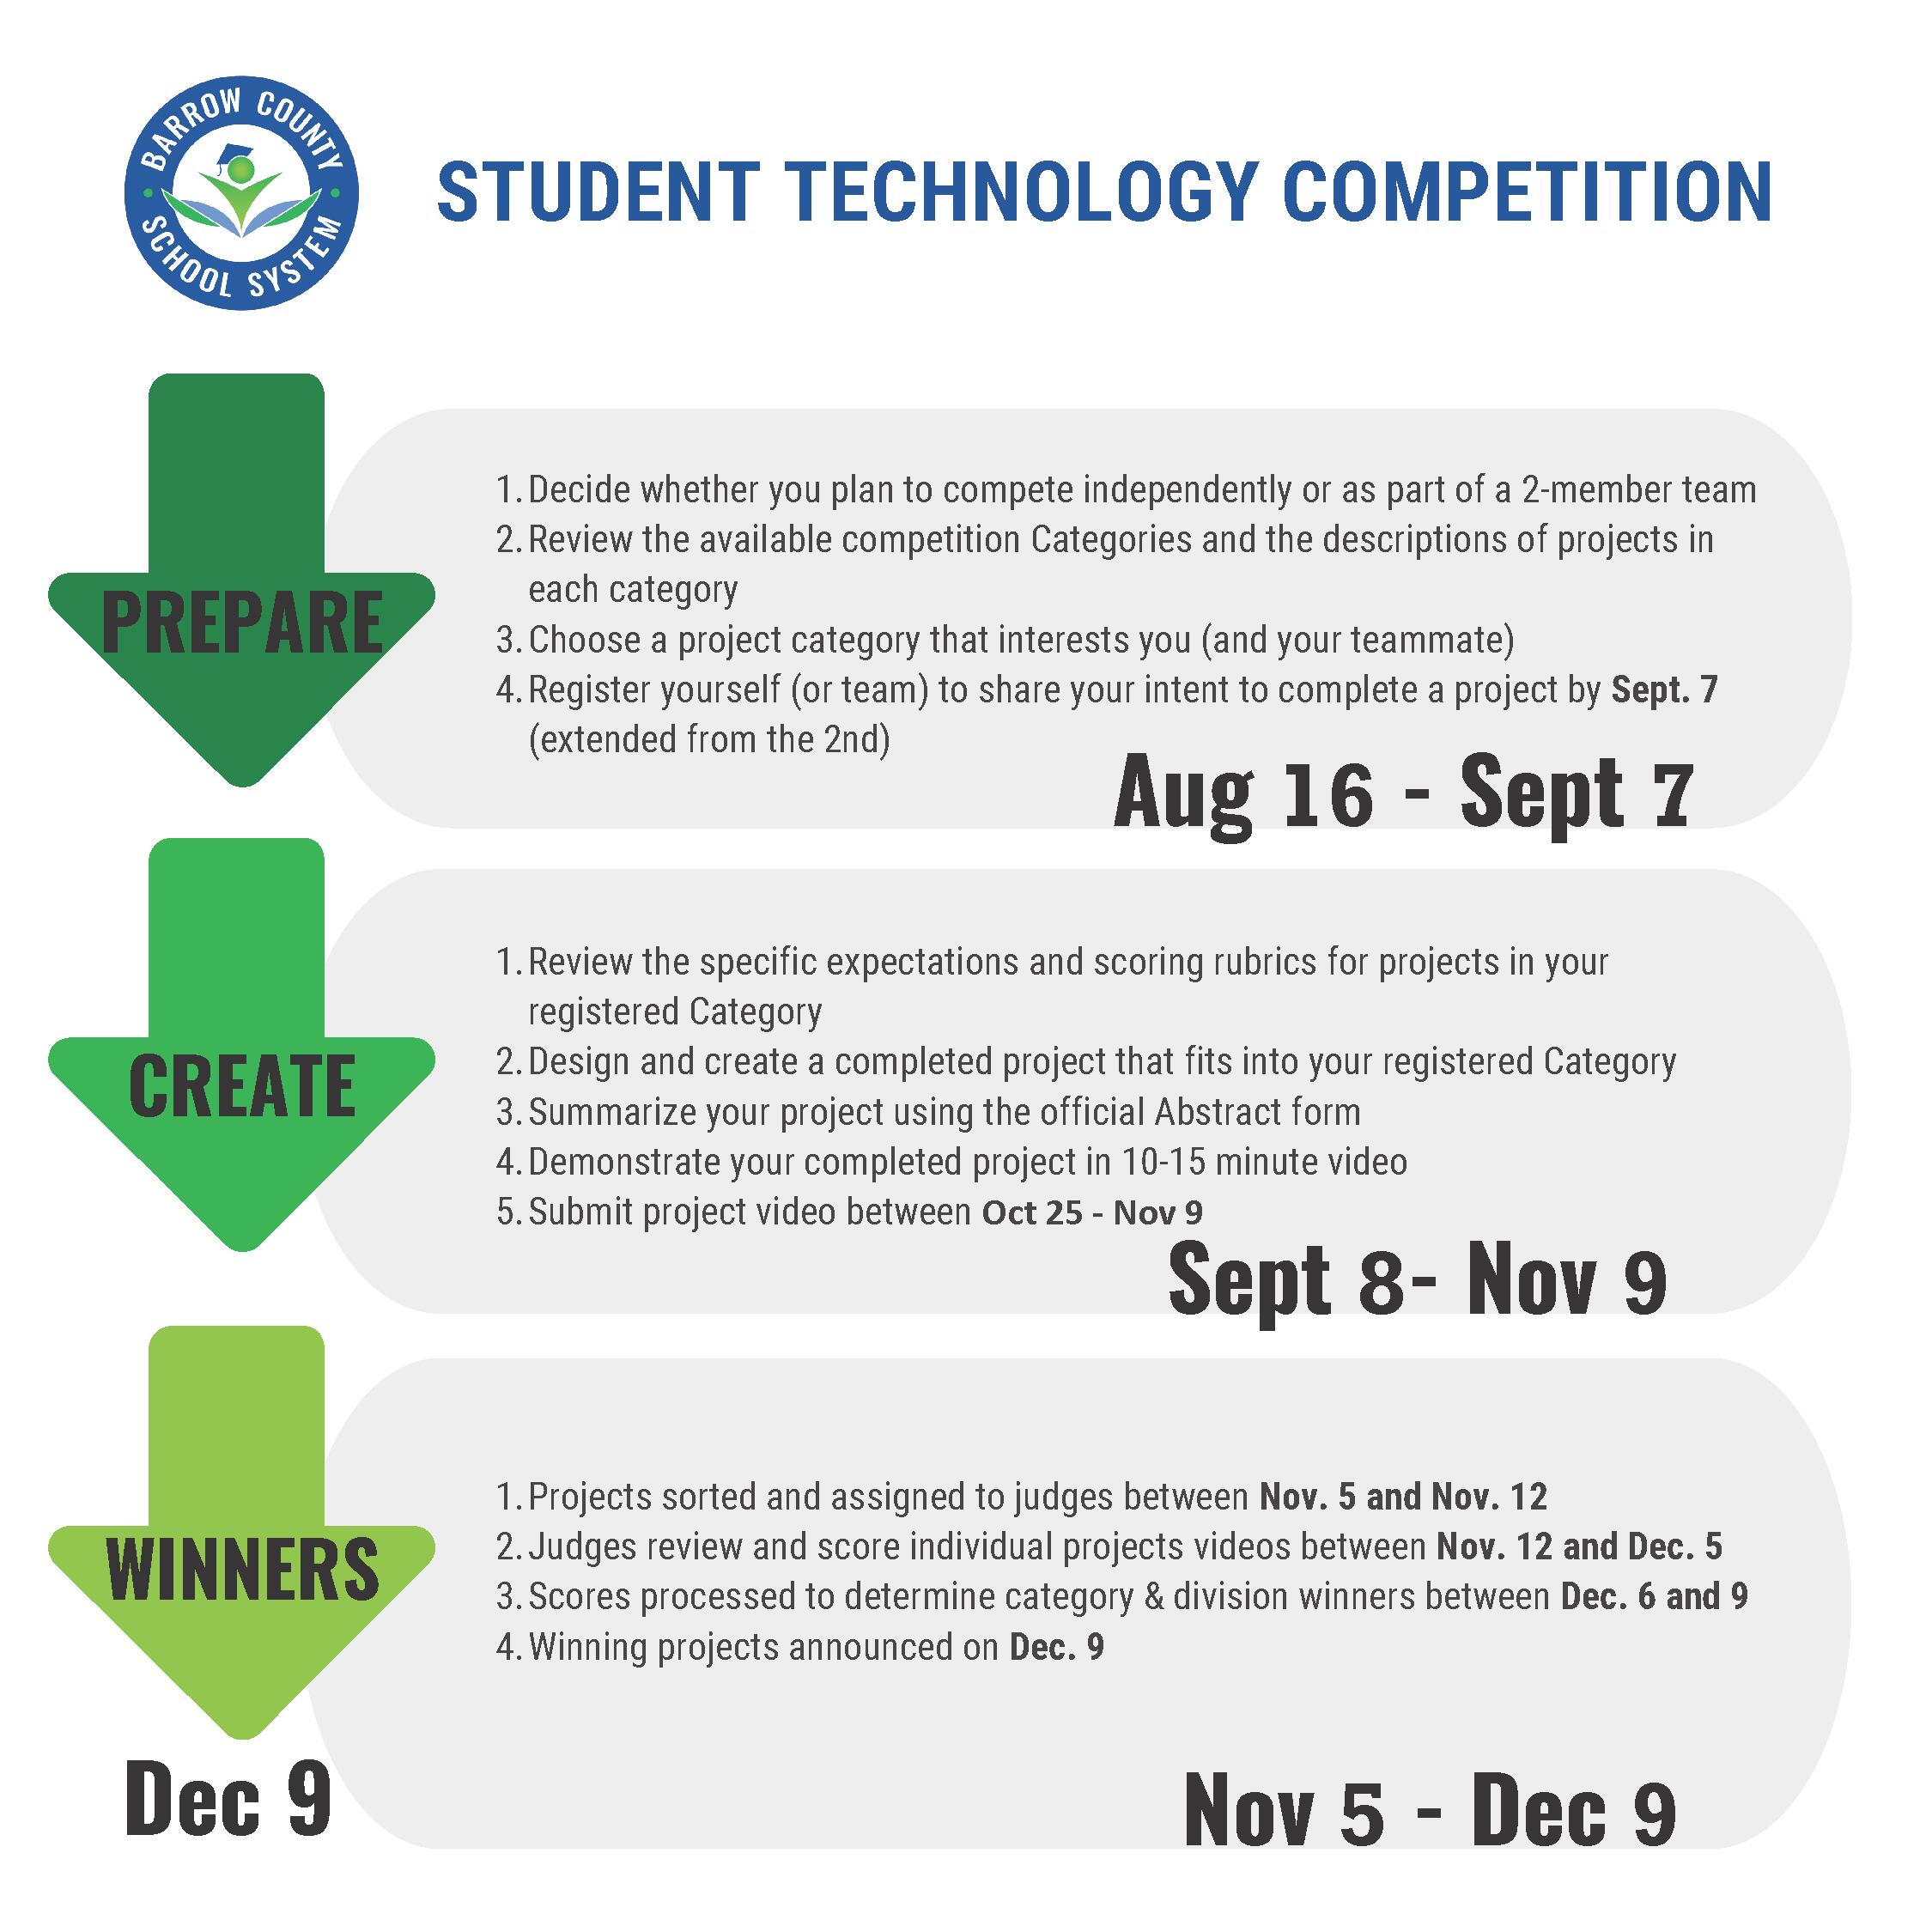 Student Technology Competition 3-Step Process: Prepare, Create, Compete